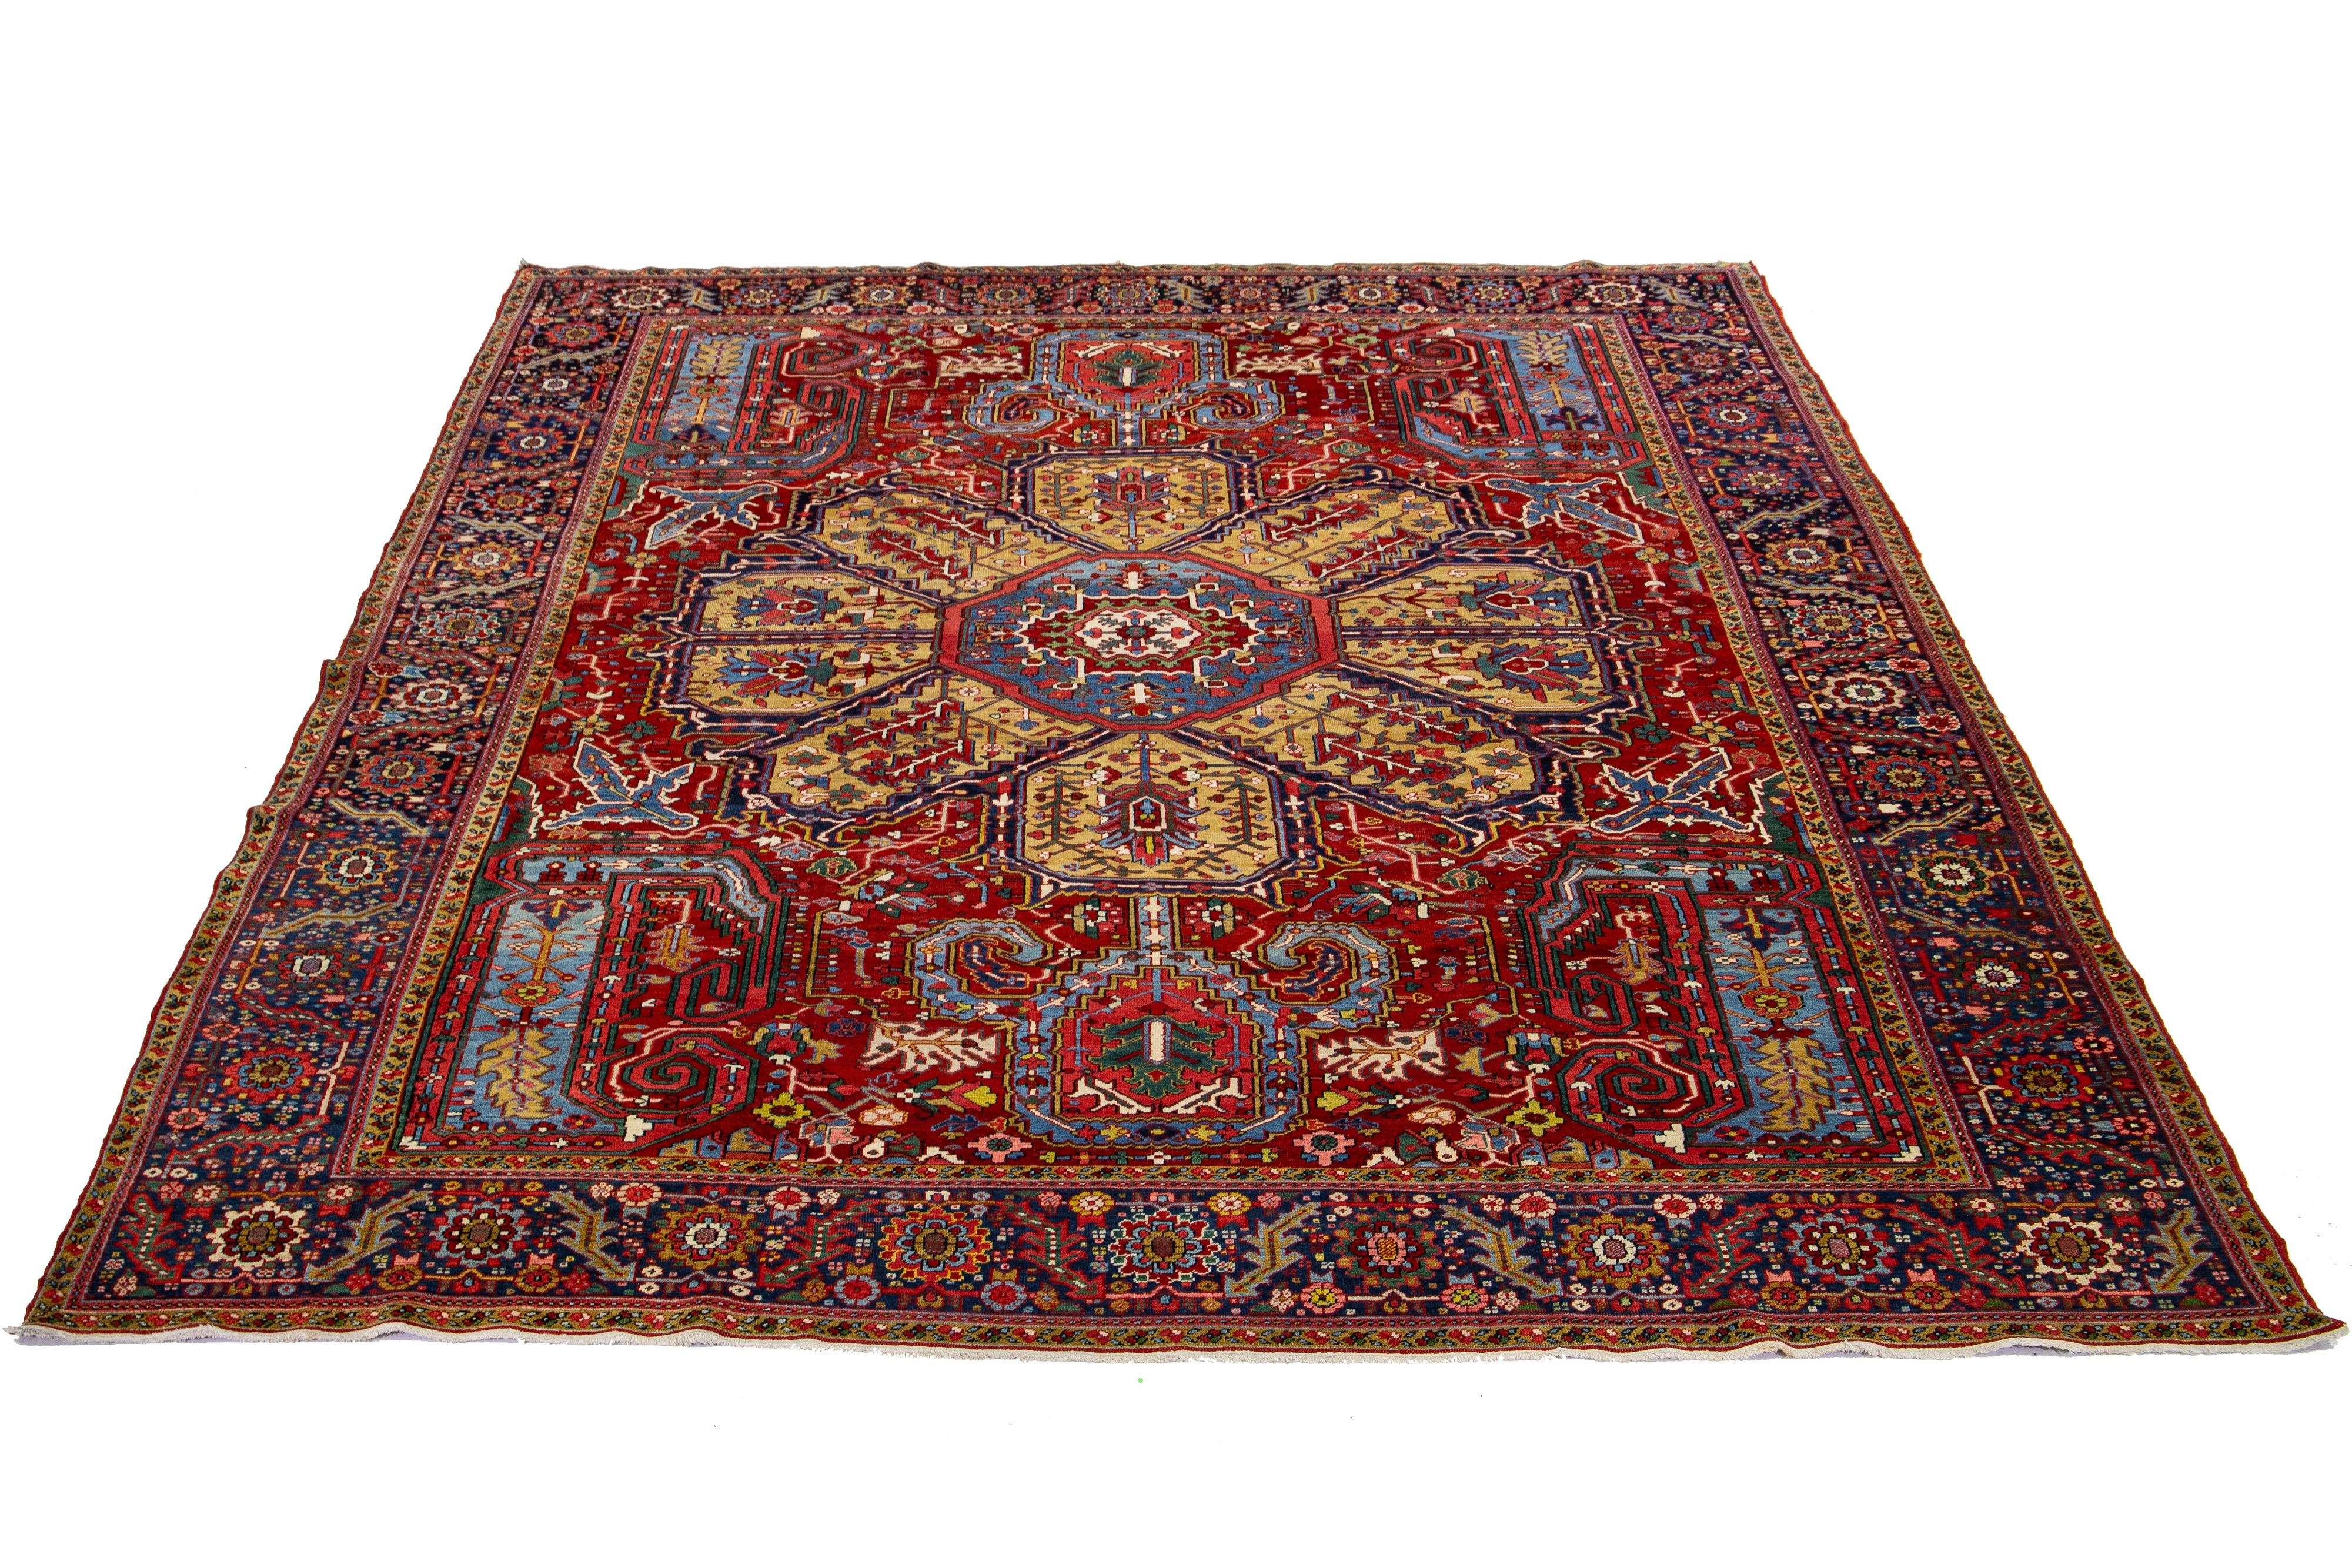 This is a beautiful antique Heriz hand-knotted wool rug featuring a red field. The Persian rug showcases a dark goldenrod center medallion motif and a multicolor allover design.

This rug measures 11' 1